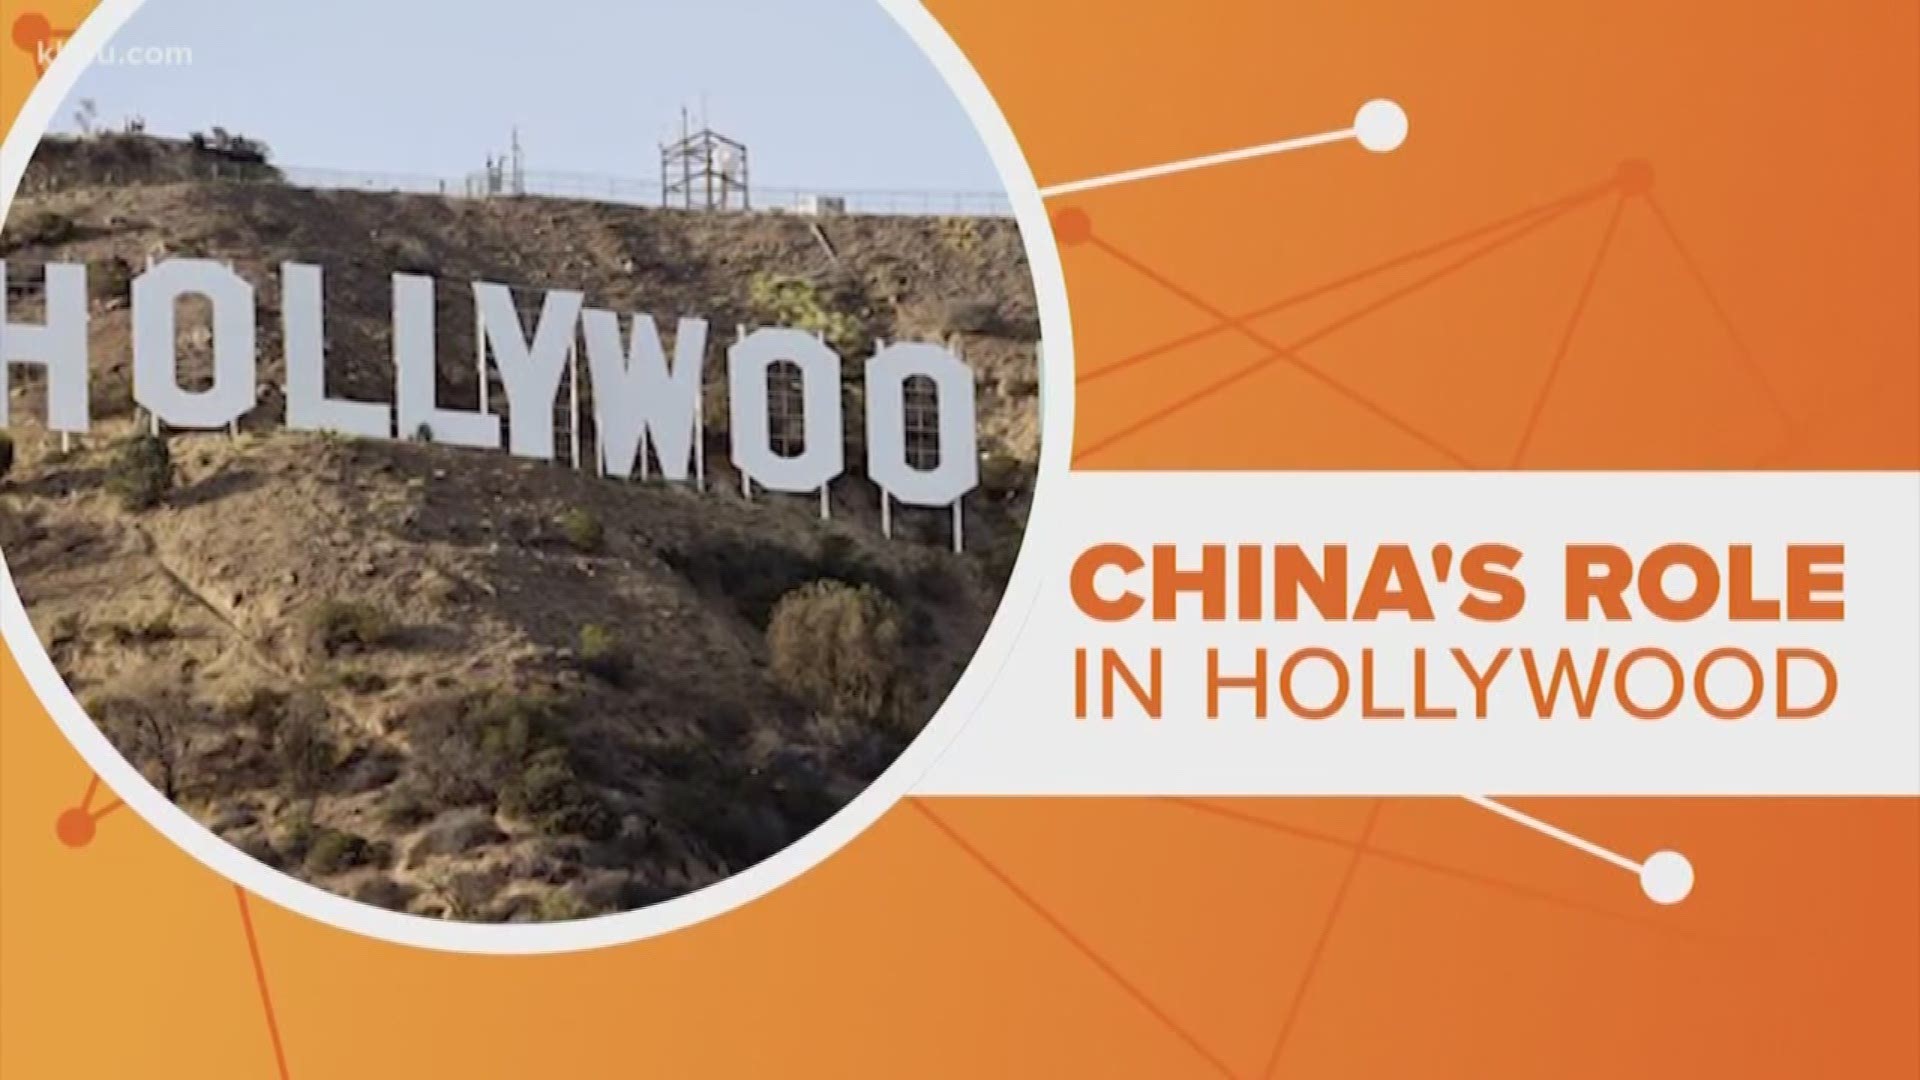 A battle between film studios and China could impact what we see on the screen here at home. Stephanie Whitfield connects the dots.